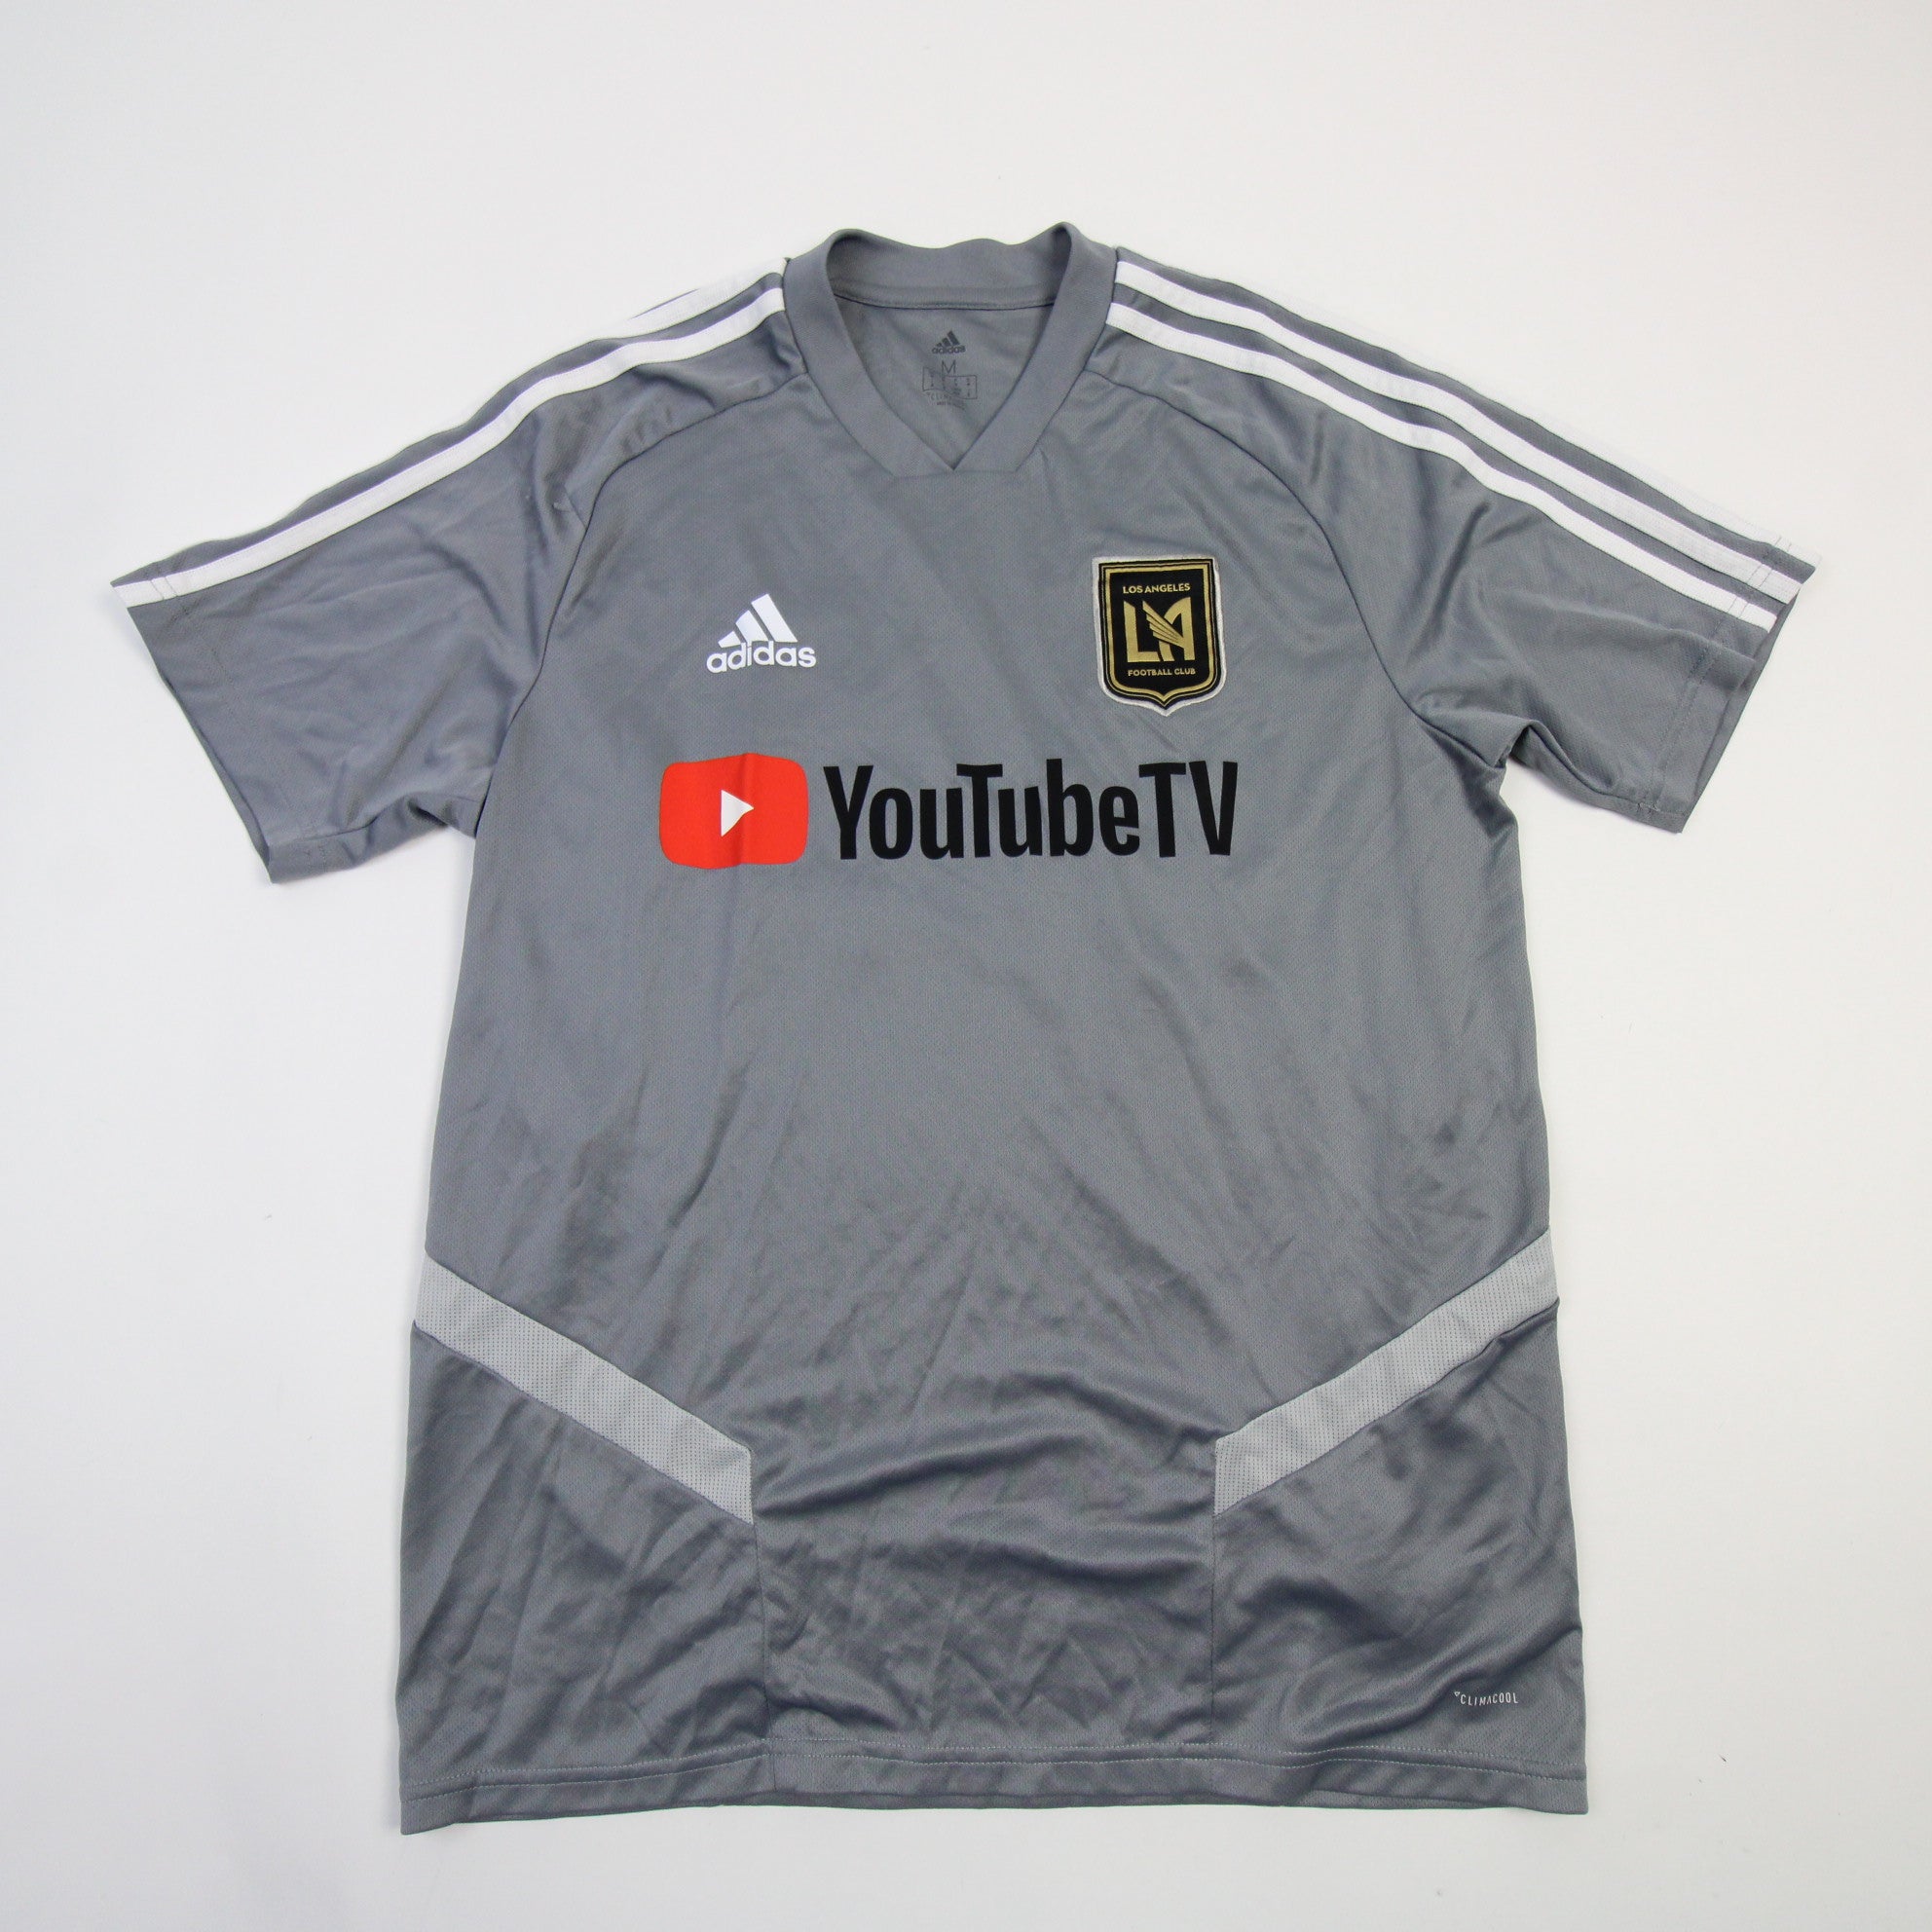 LAFC Signed Jerseys, Collectible Los Angeles FC Jerseys